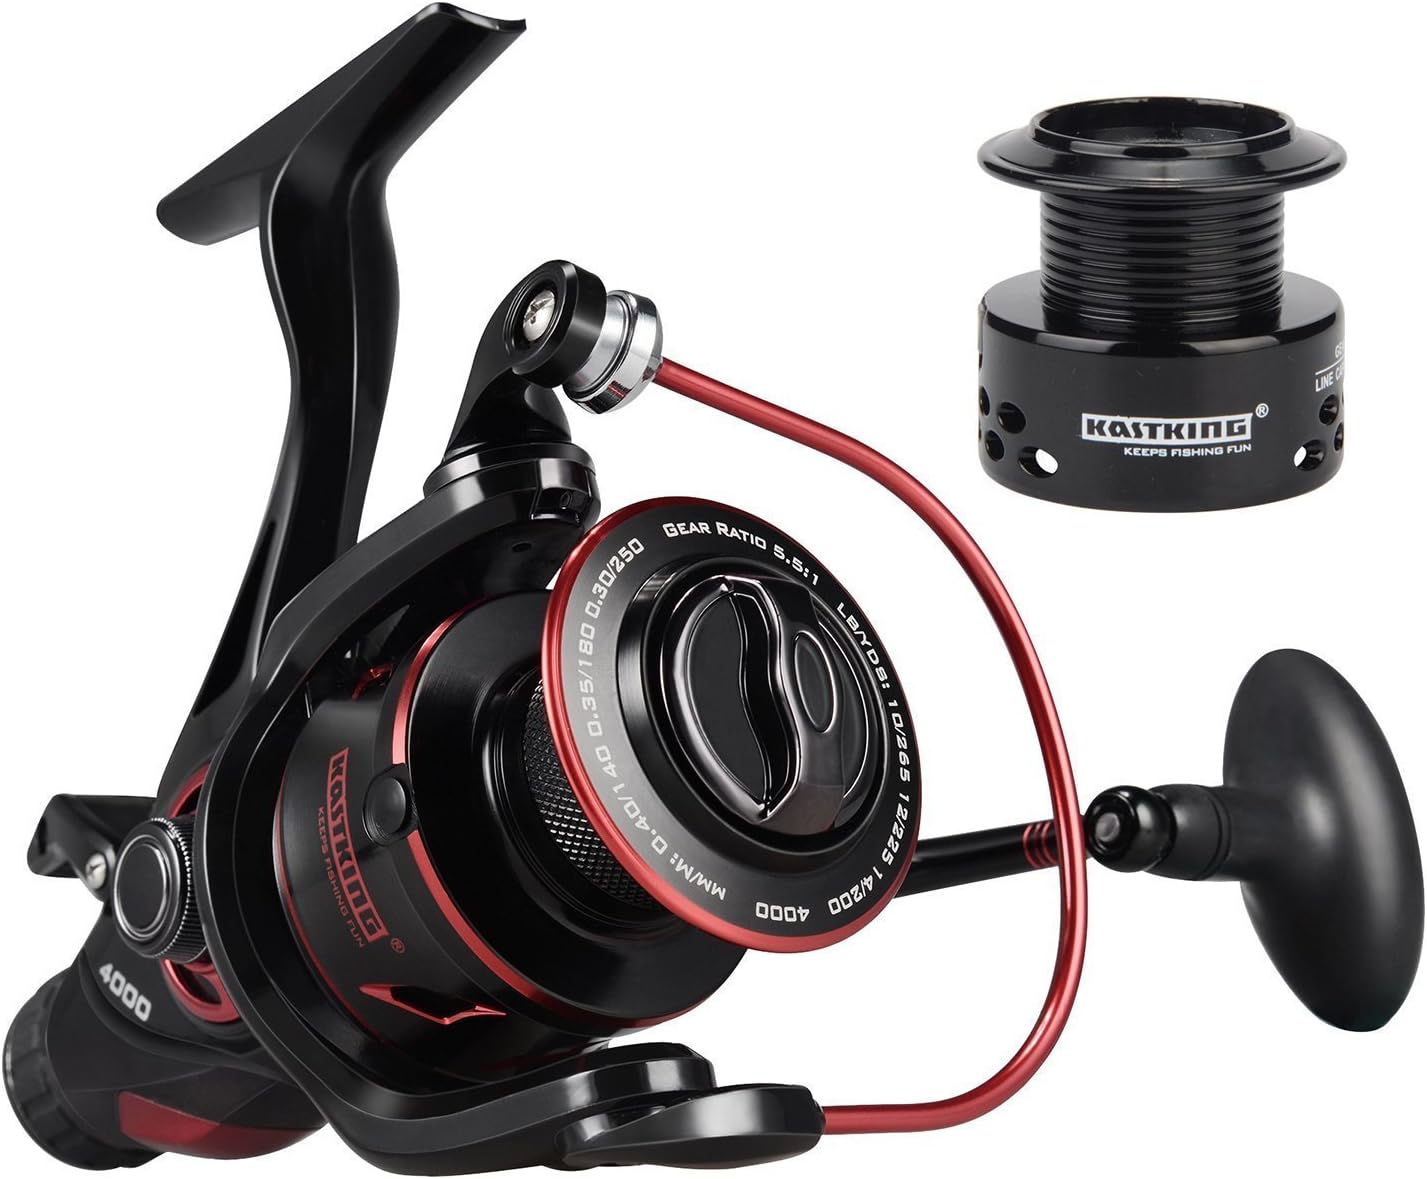 Best Feeder Reel: Top Picks for Smooth Fishing Action